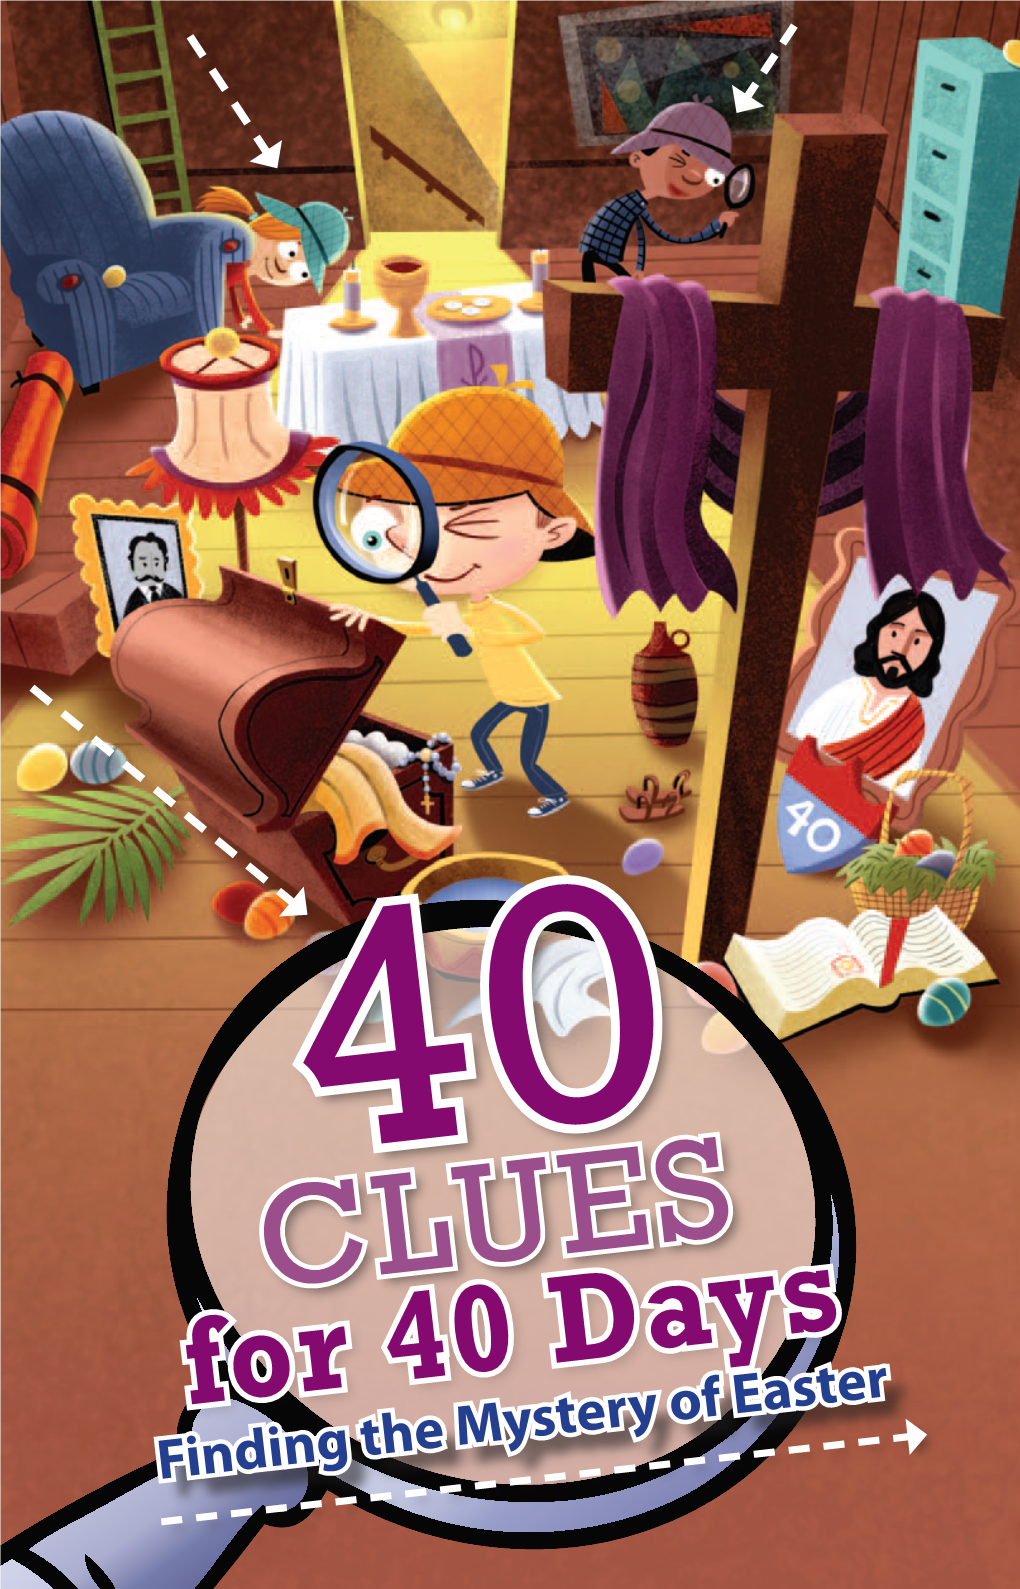 For 40 Days Was Written by Dina Strong with Illustrations by Ed Koehler